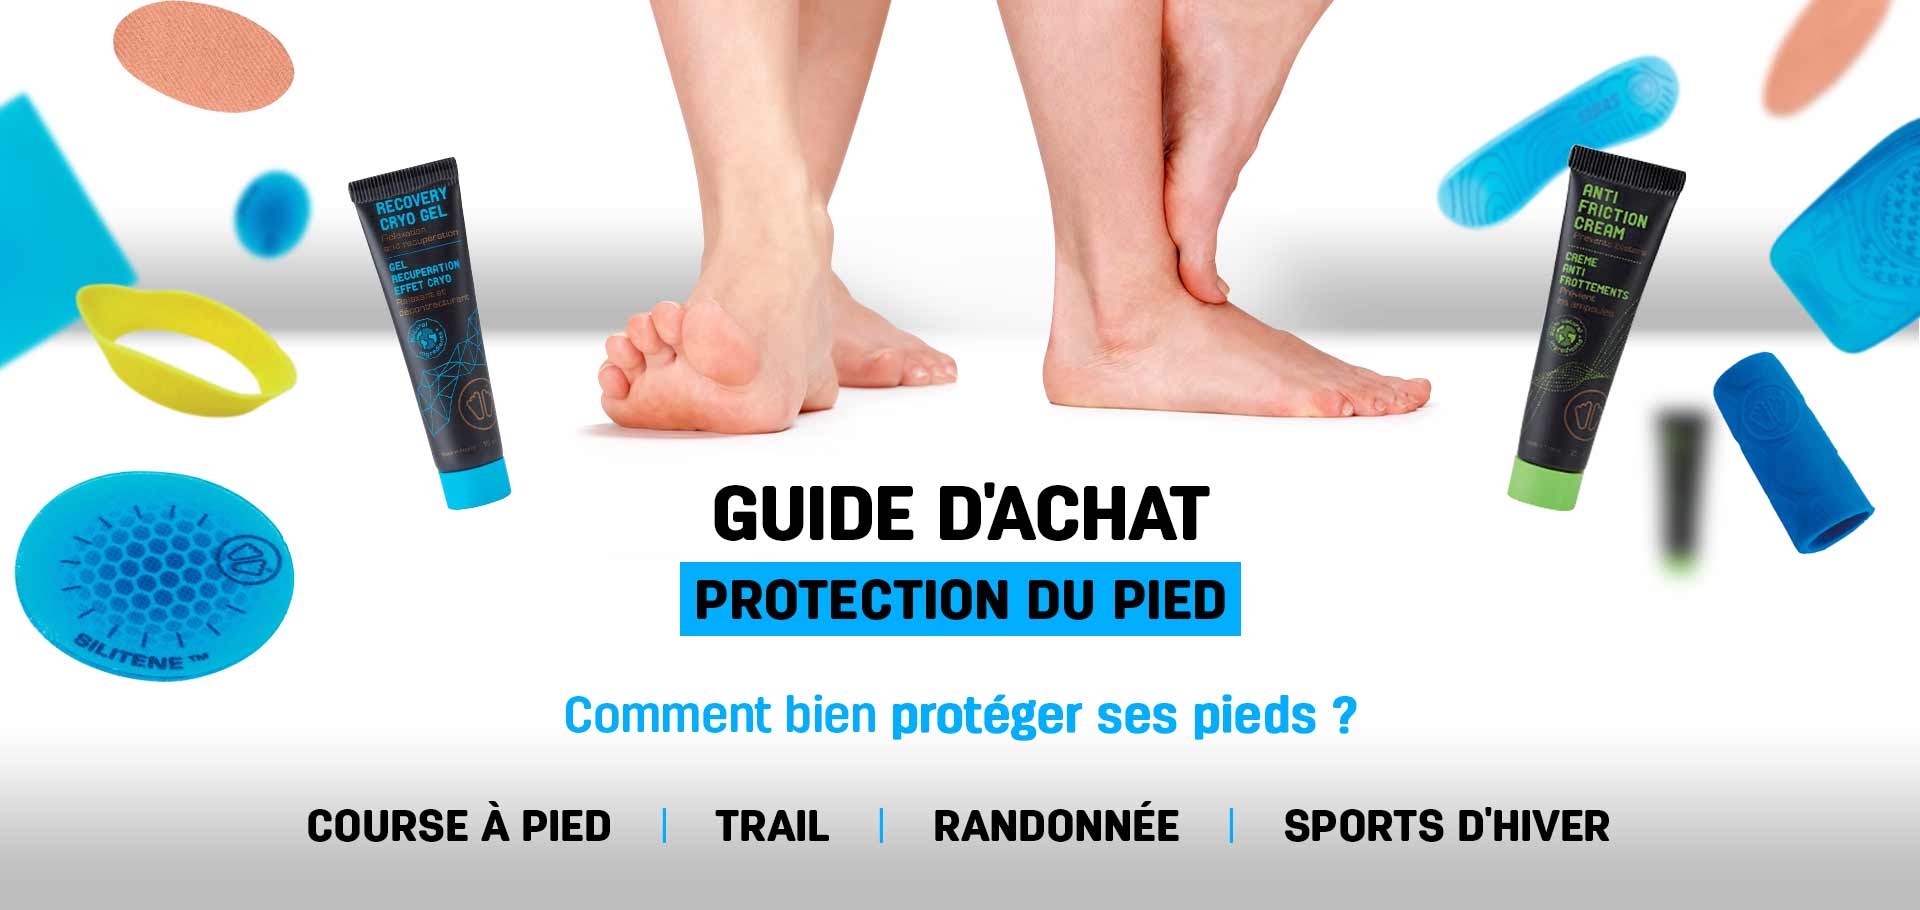 Guide d'achat protections du pied